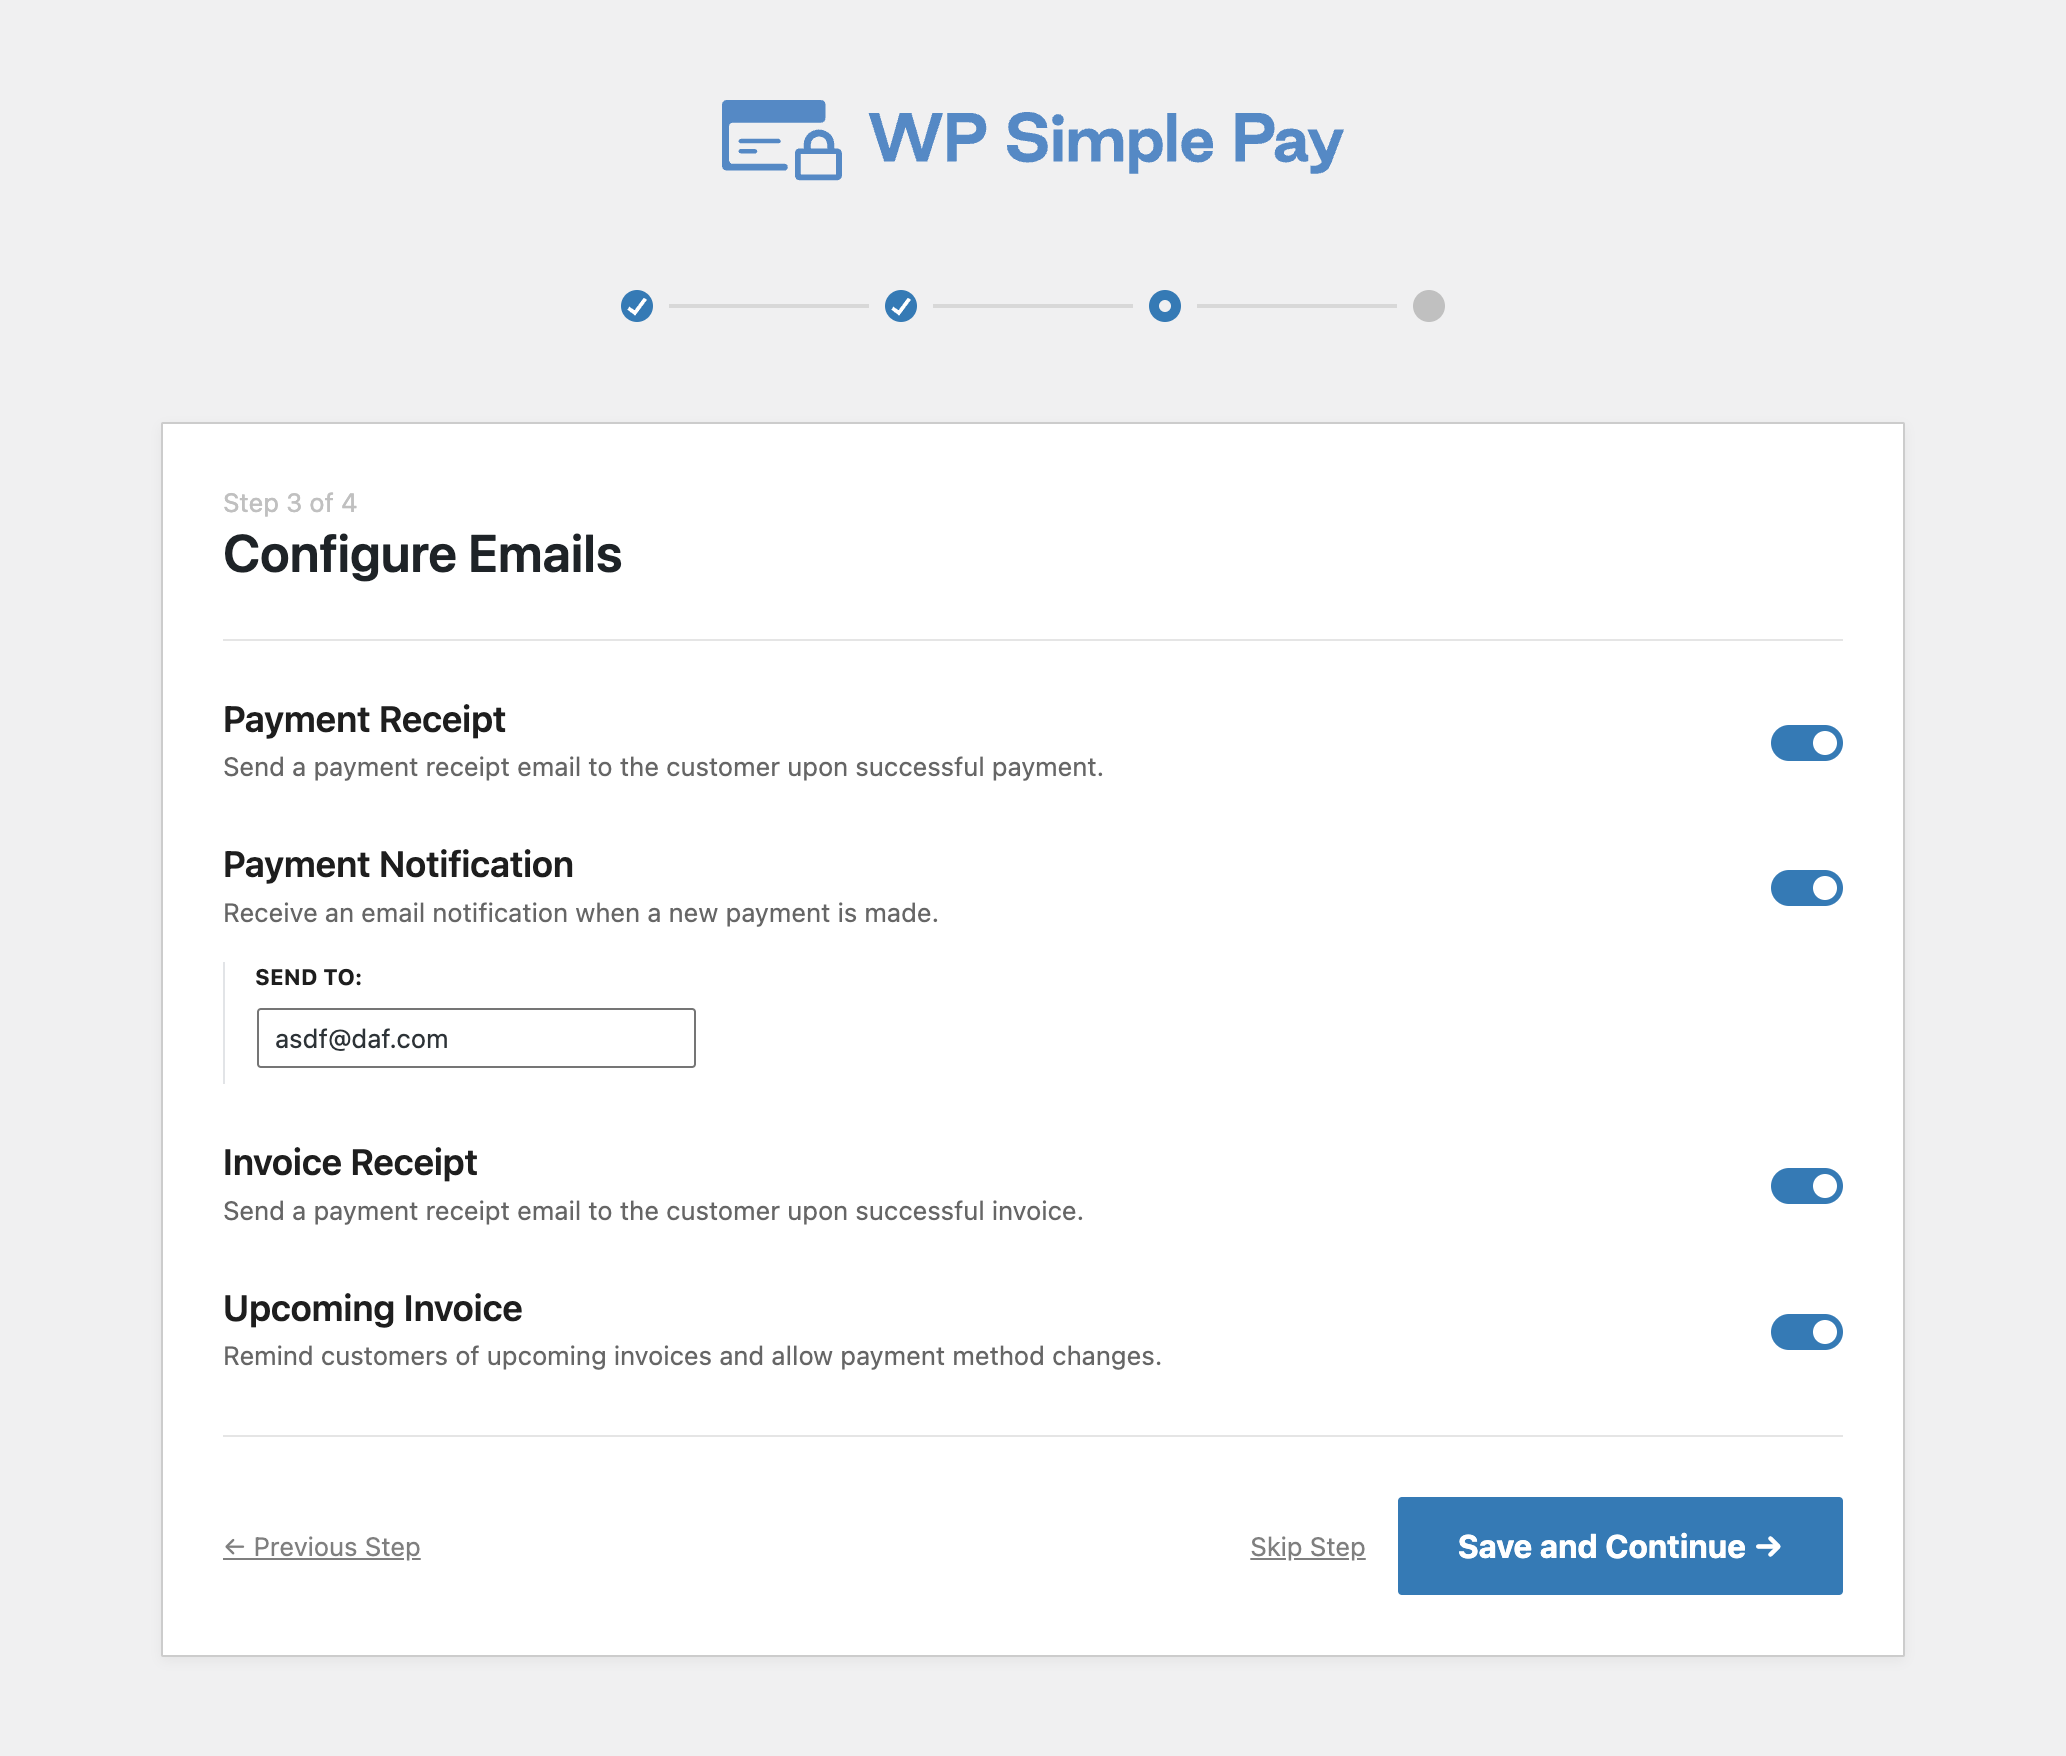 WP Simple Pay setup wizard email configuration